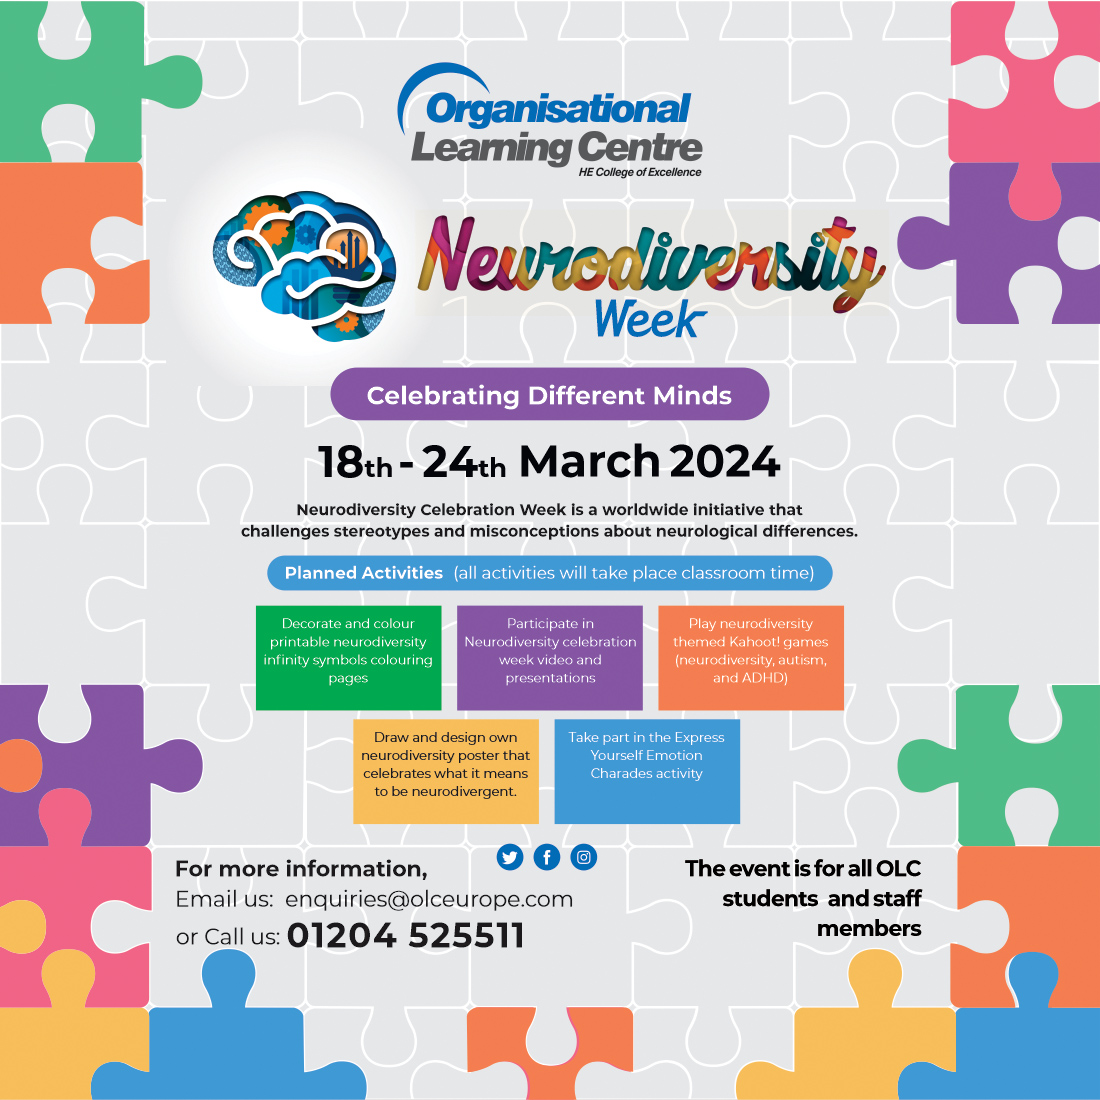 Mark your calendars for 18th -24th March 2024 as we get involved with the Neurodiversity Celebration Week at OLC college.

All activities will be held in class time with your tutor and class friends. An event not to miss! Have some fun and enjoy celebrating different minds

#olc